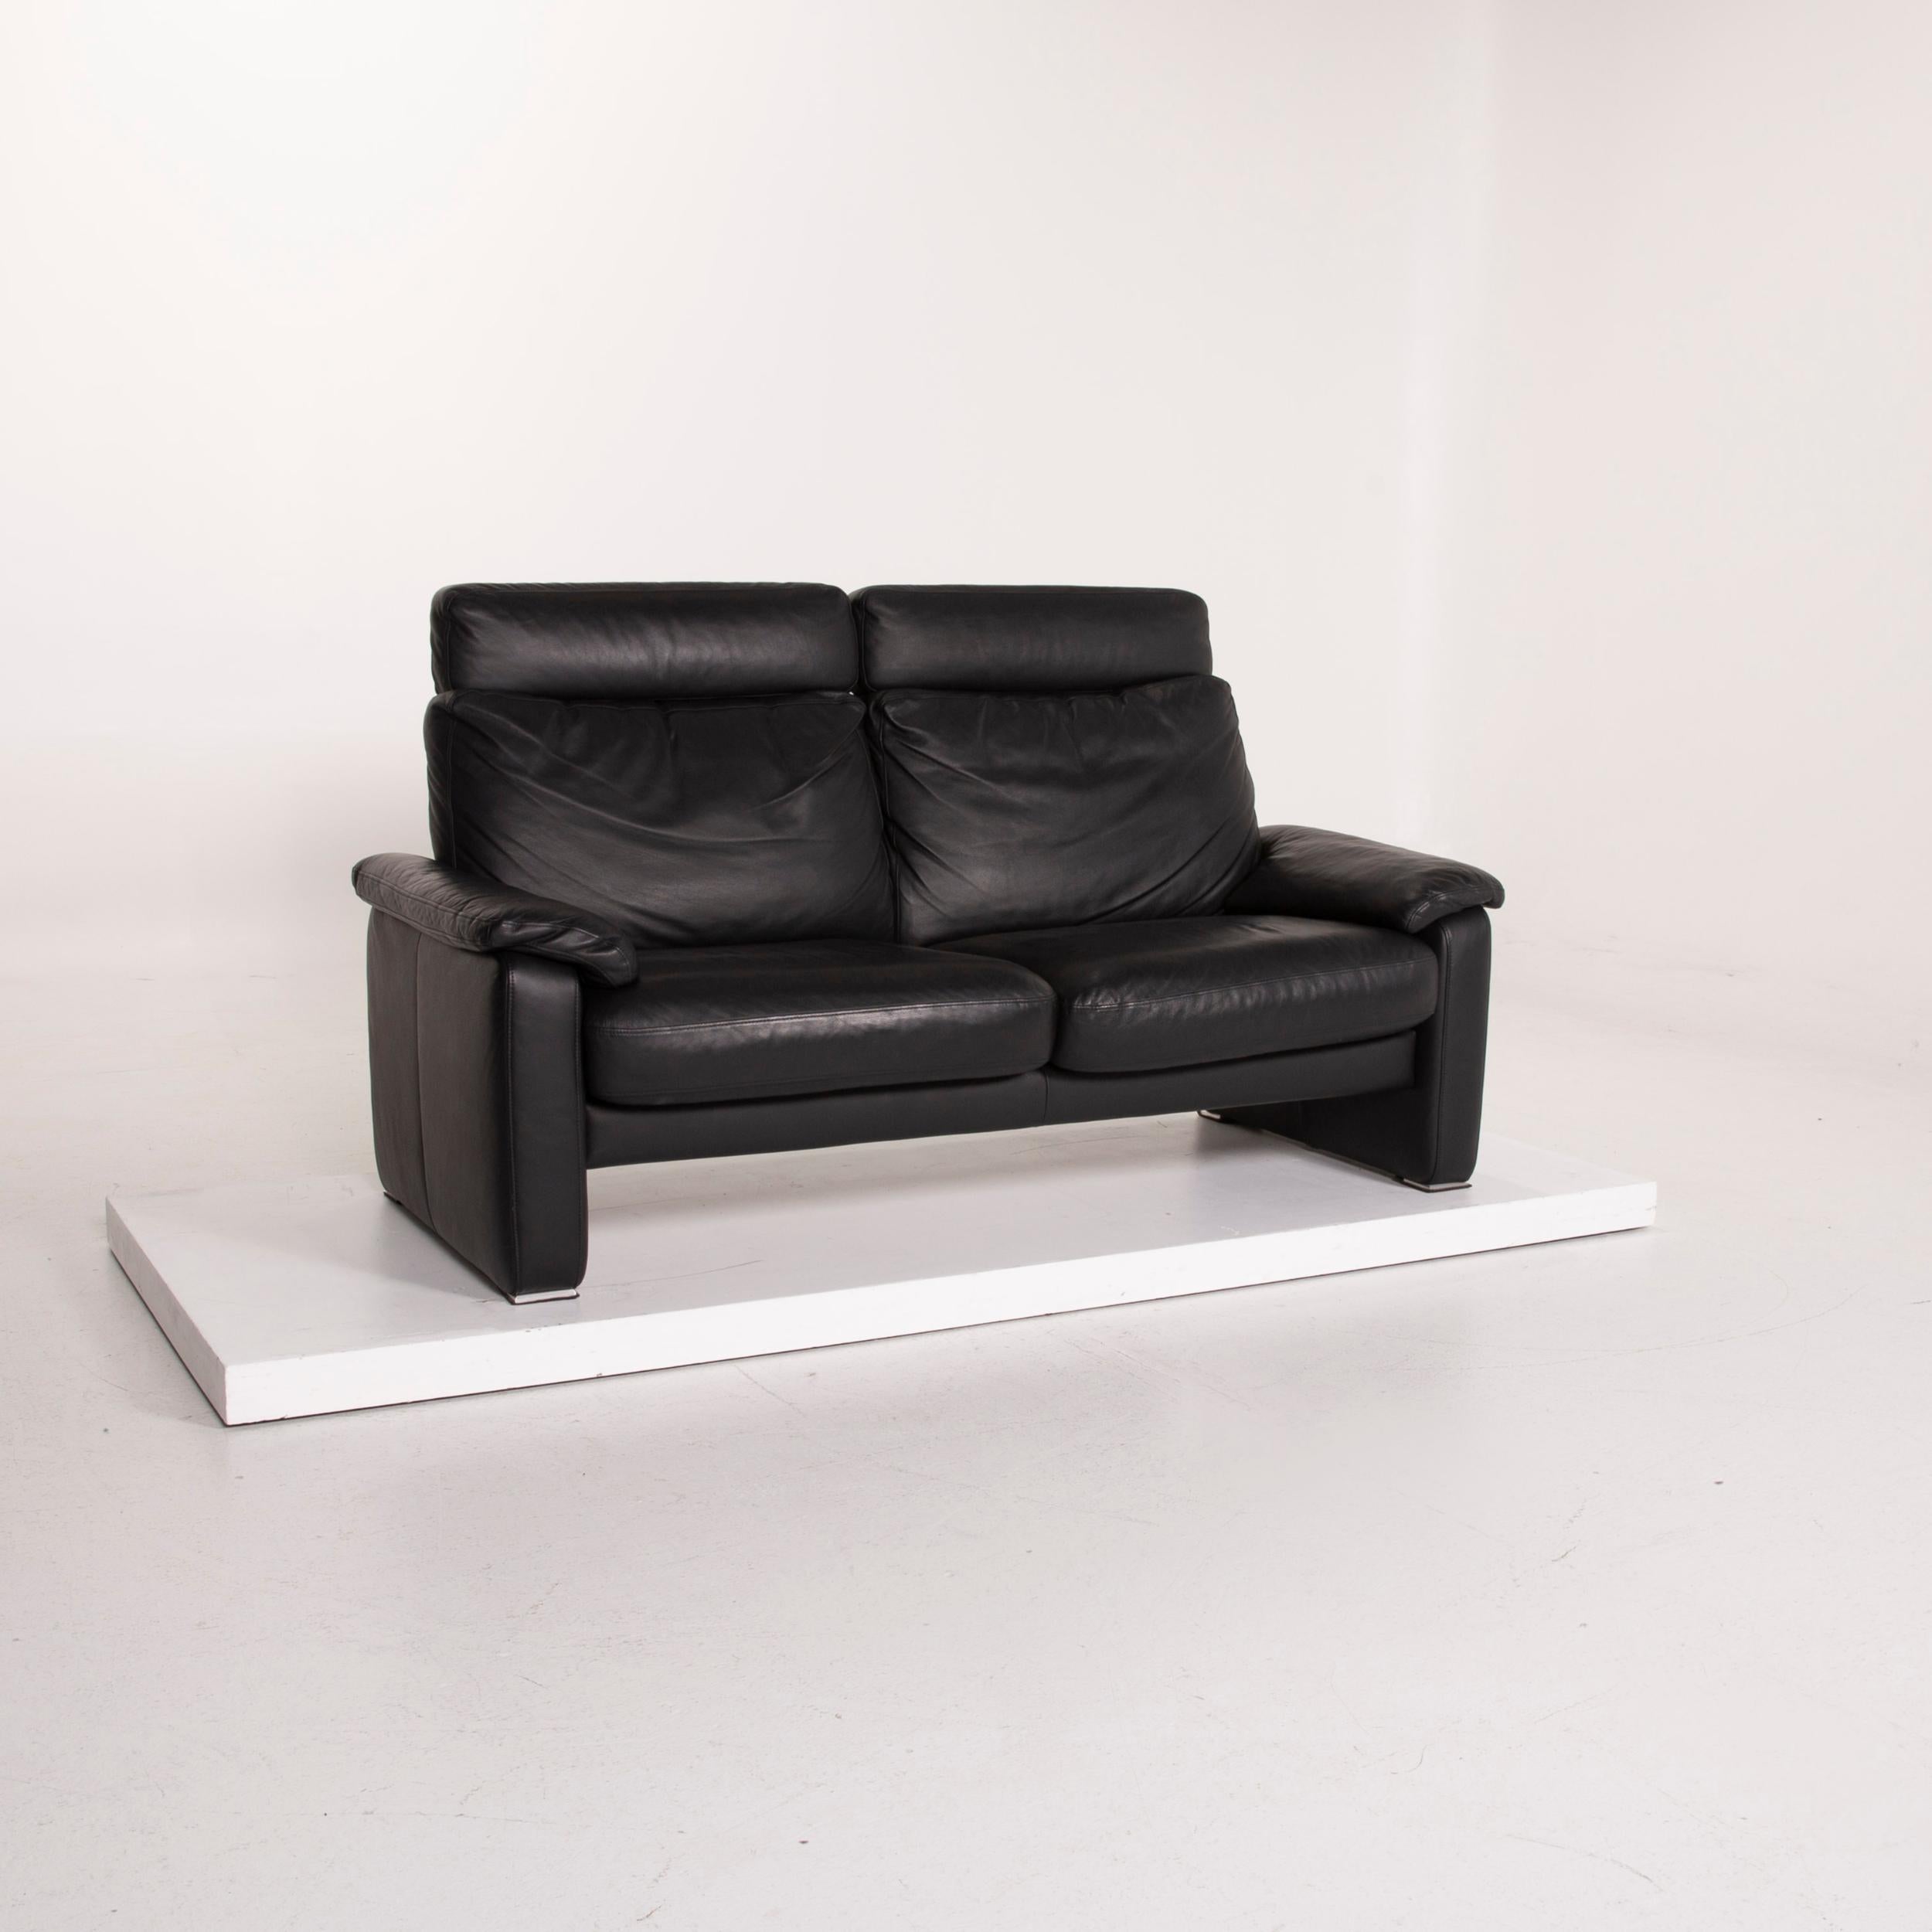 Contemporary Ewald Schillig Leather Sofa Black Two-Seat For Sale